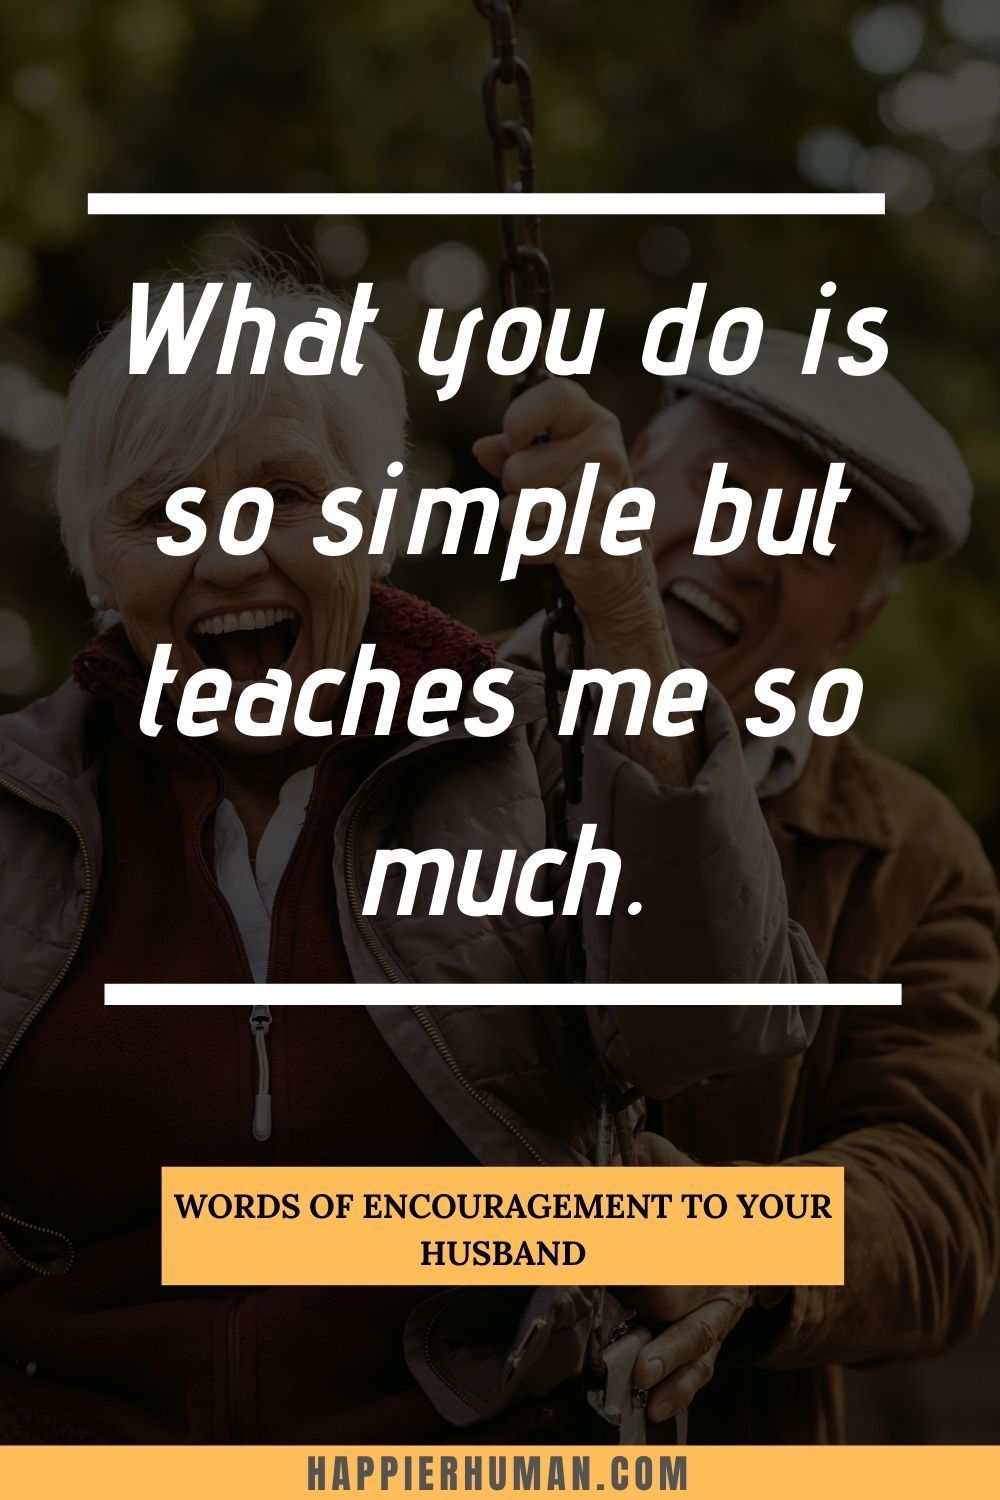 Words of Encouragement for Husbands - What you do is so simple but teaches me so much. | encouraging scriptures for husbands | words of encouragement for your lover | words of encouragement for him during hard times